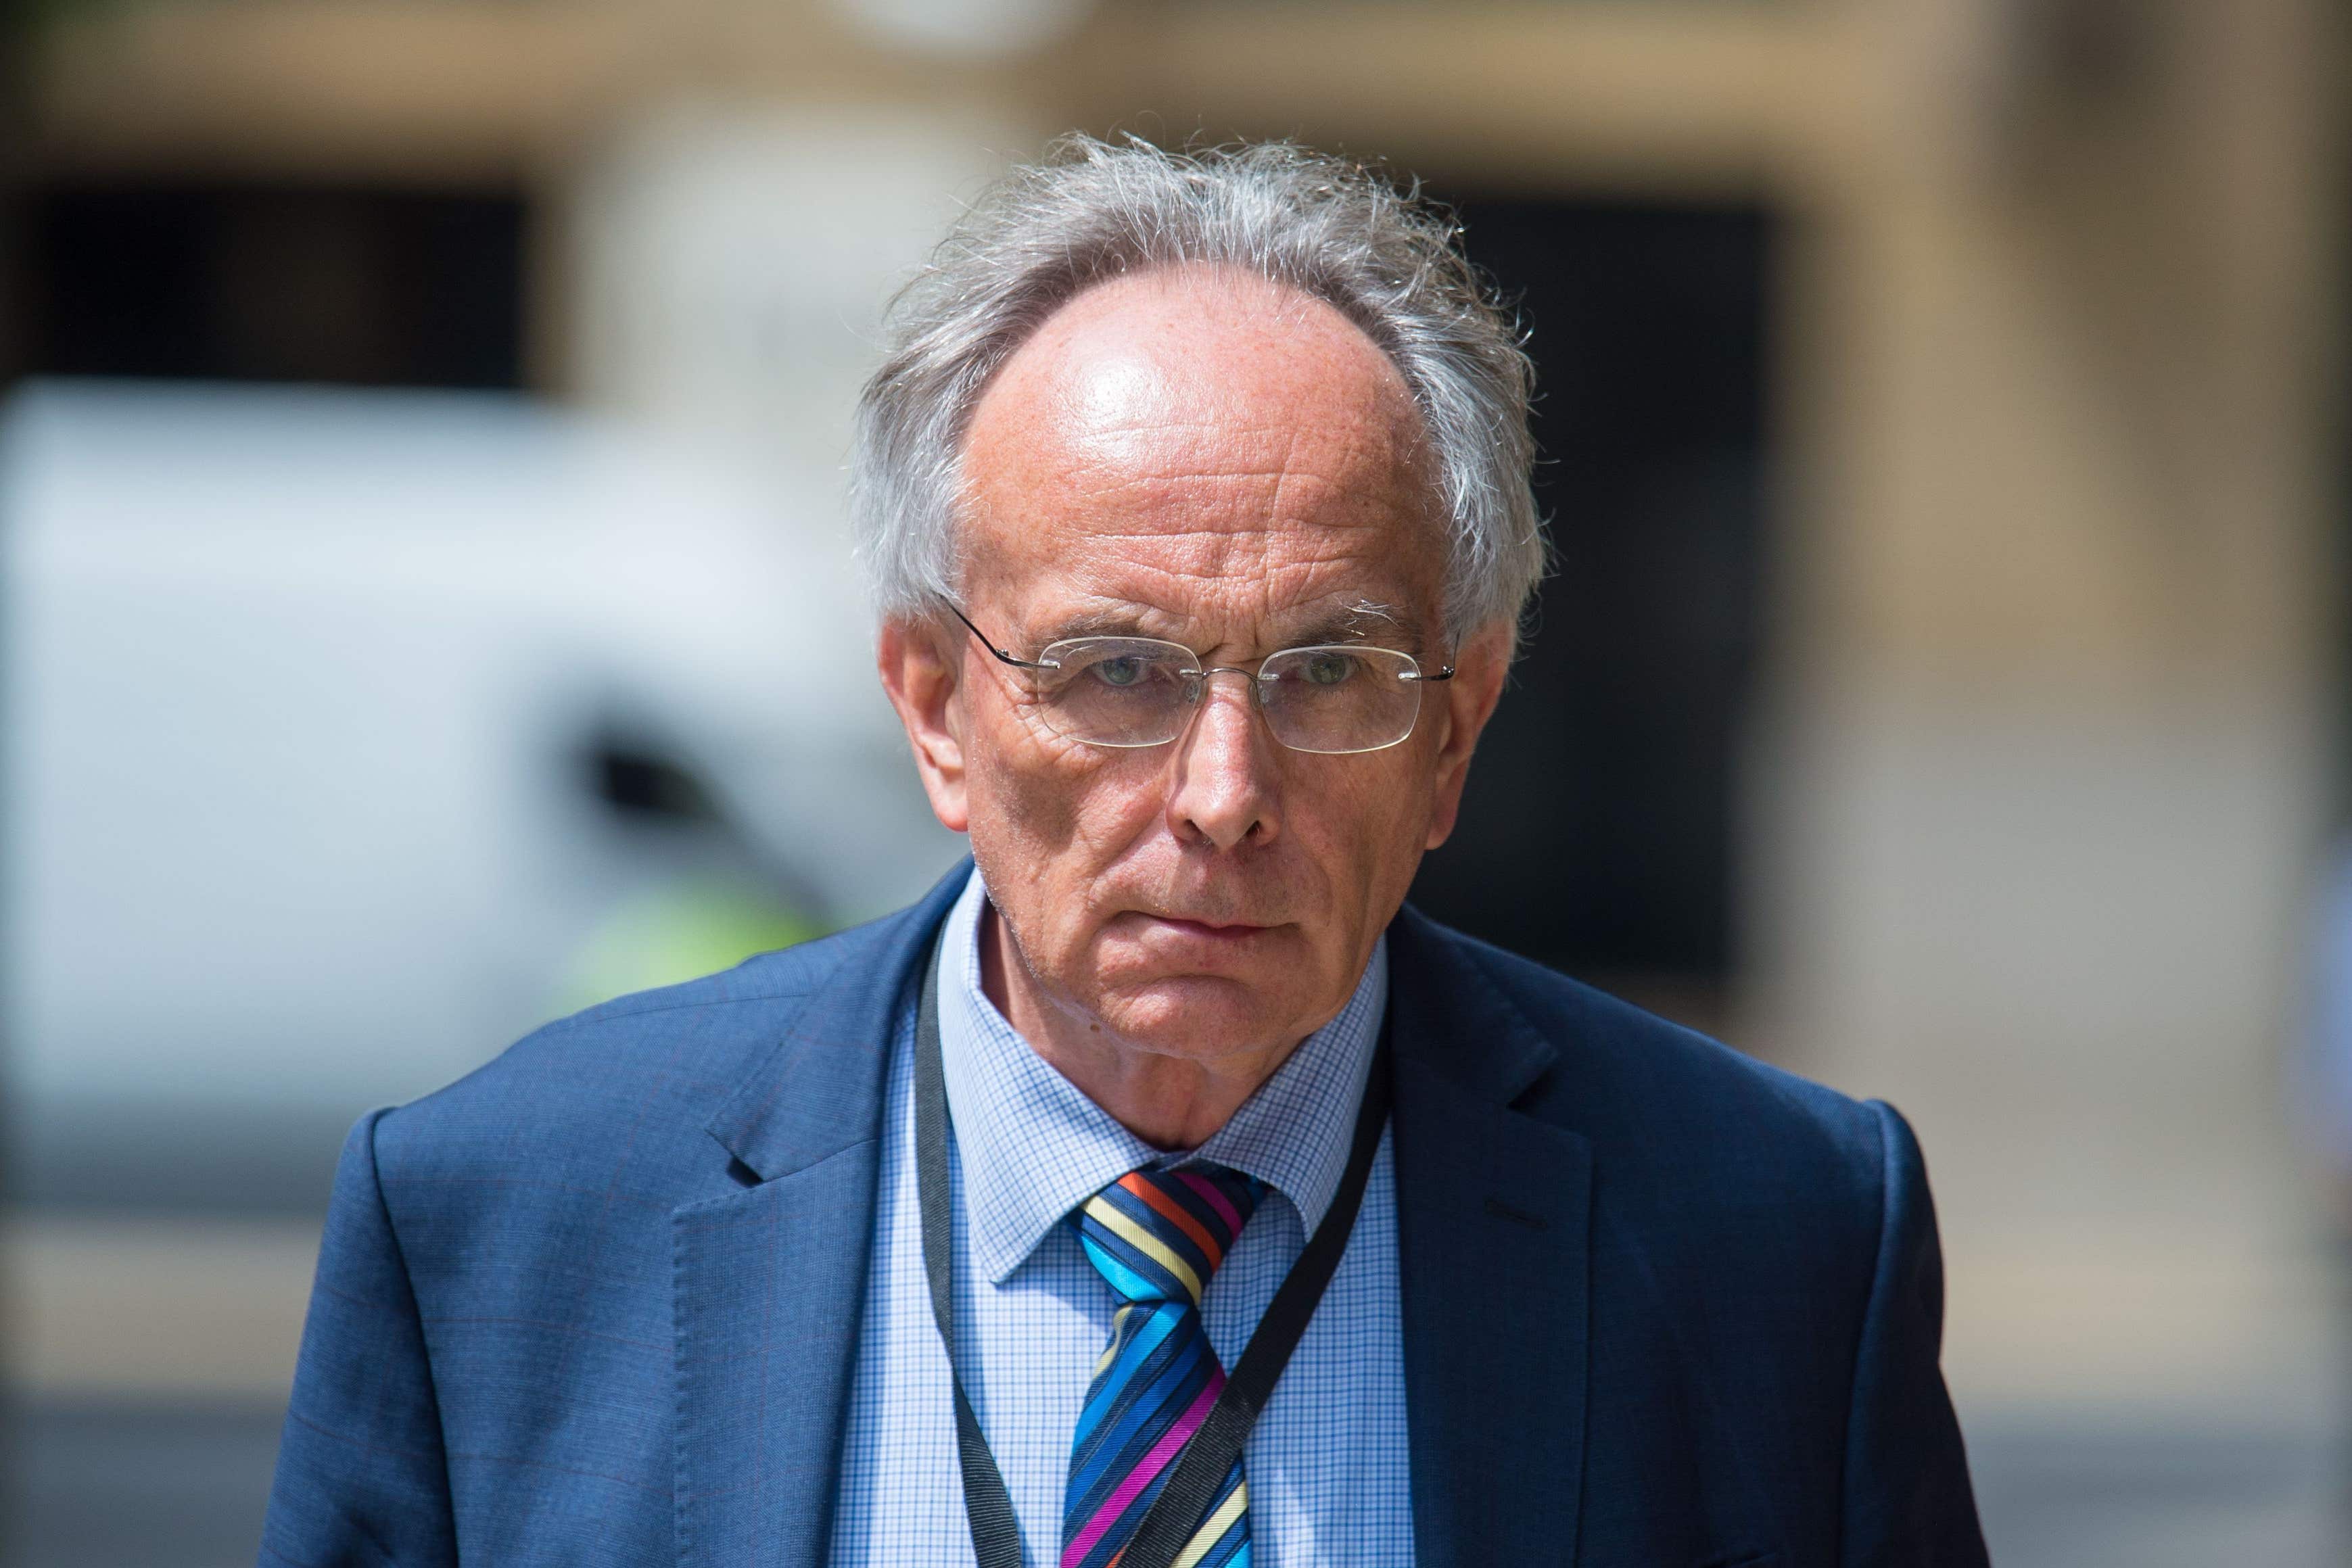 Tory MP Peter Bone has been recommended for a six-week suspension from the Commons